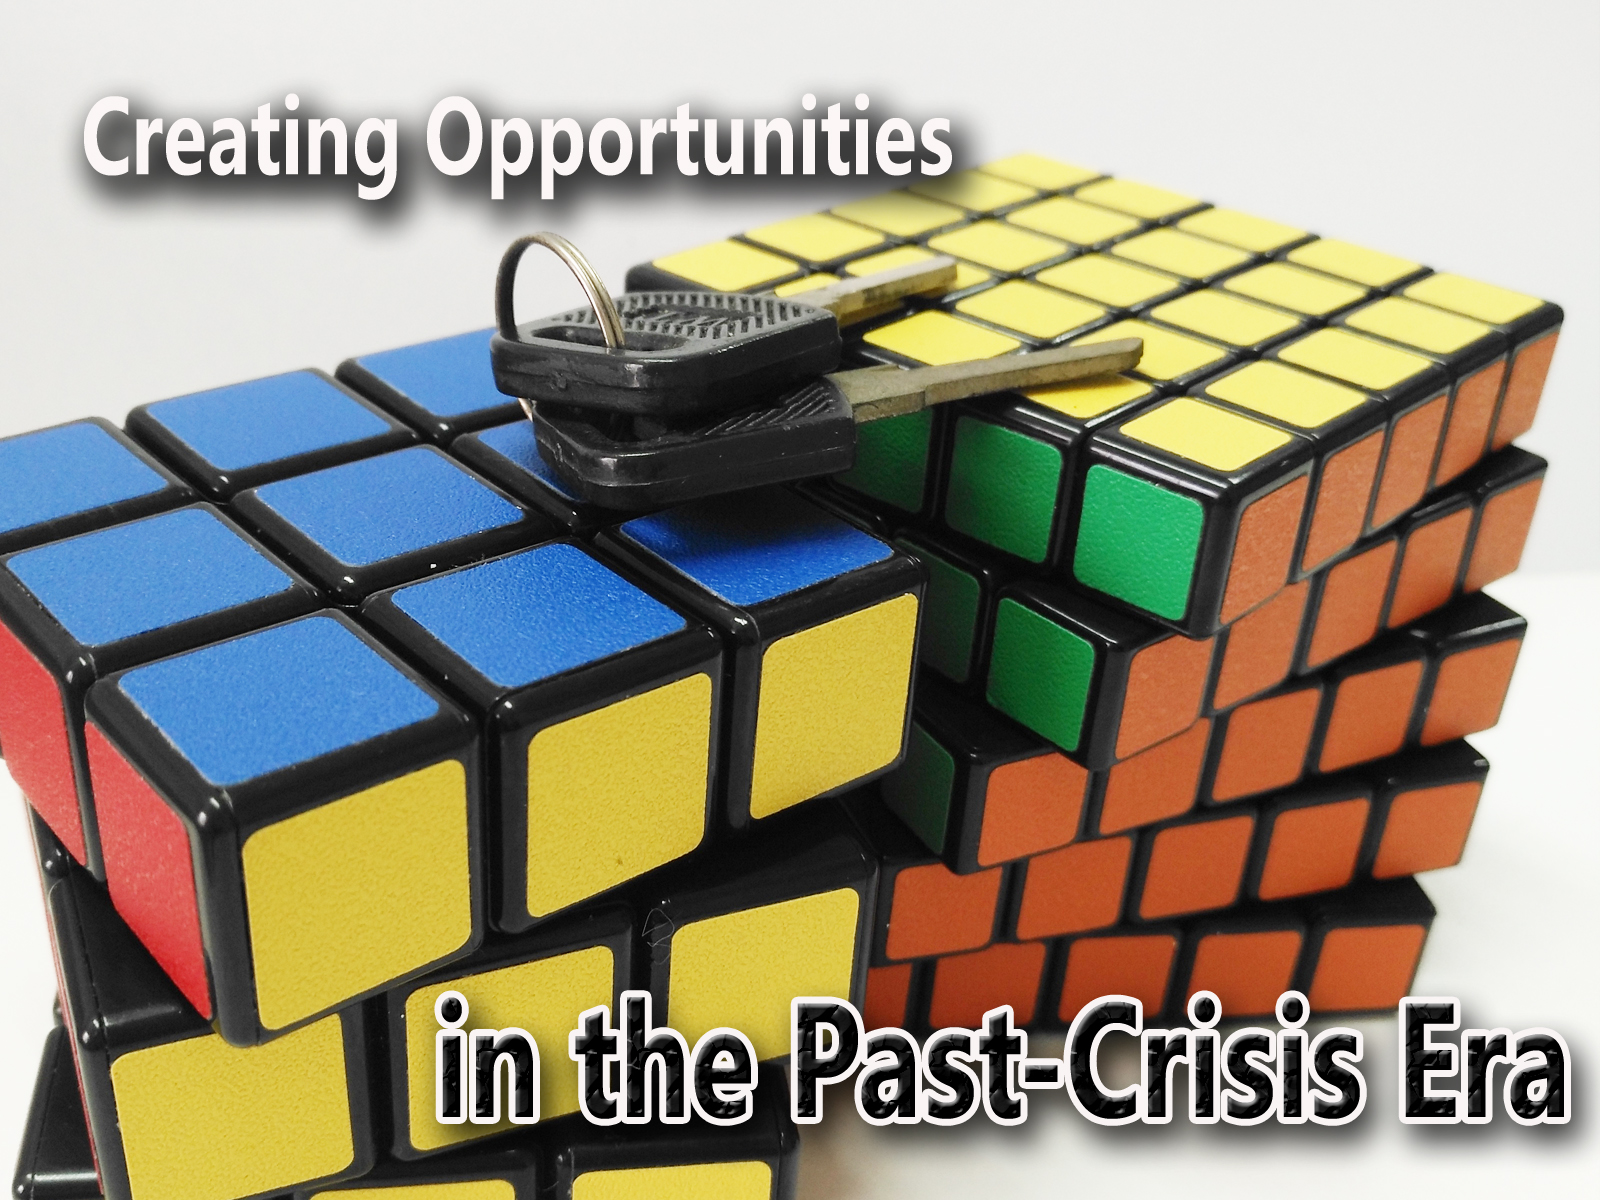 Grasping Development Opportunities in the Post-Crisis Era